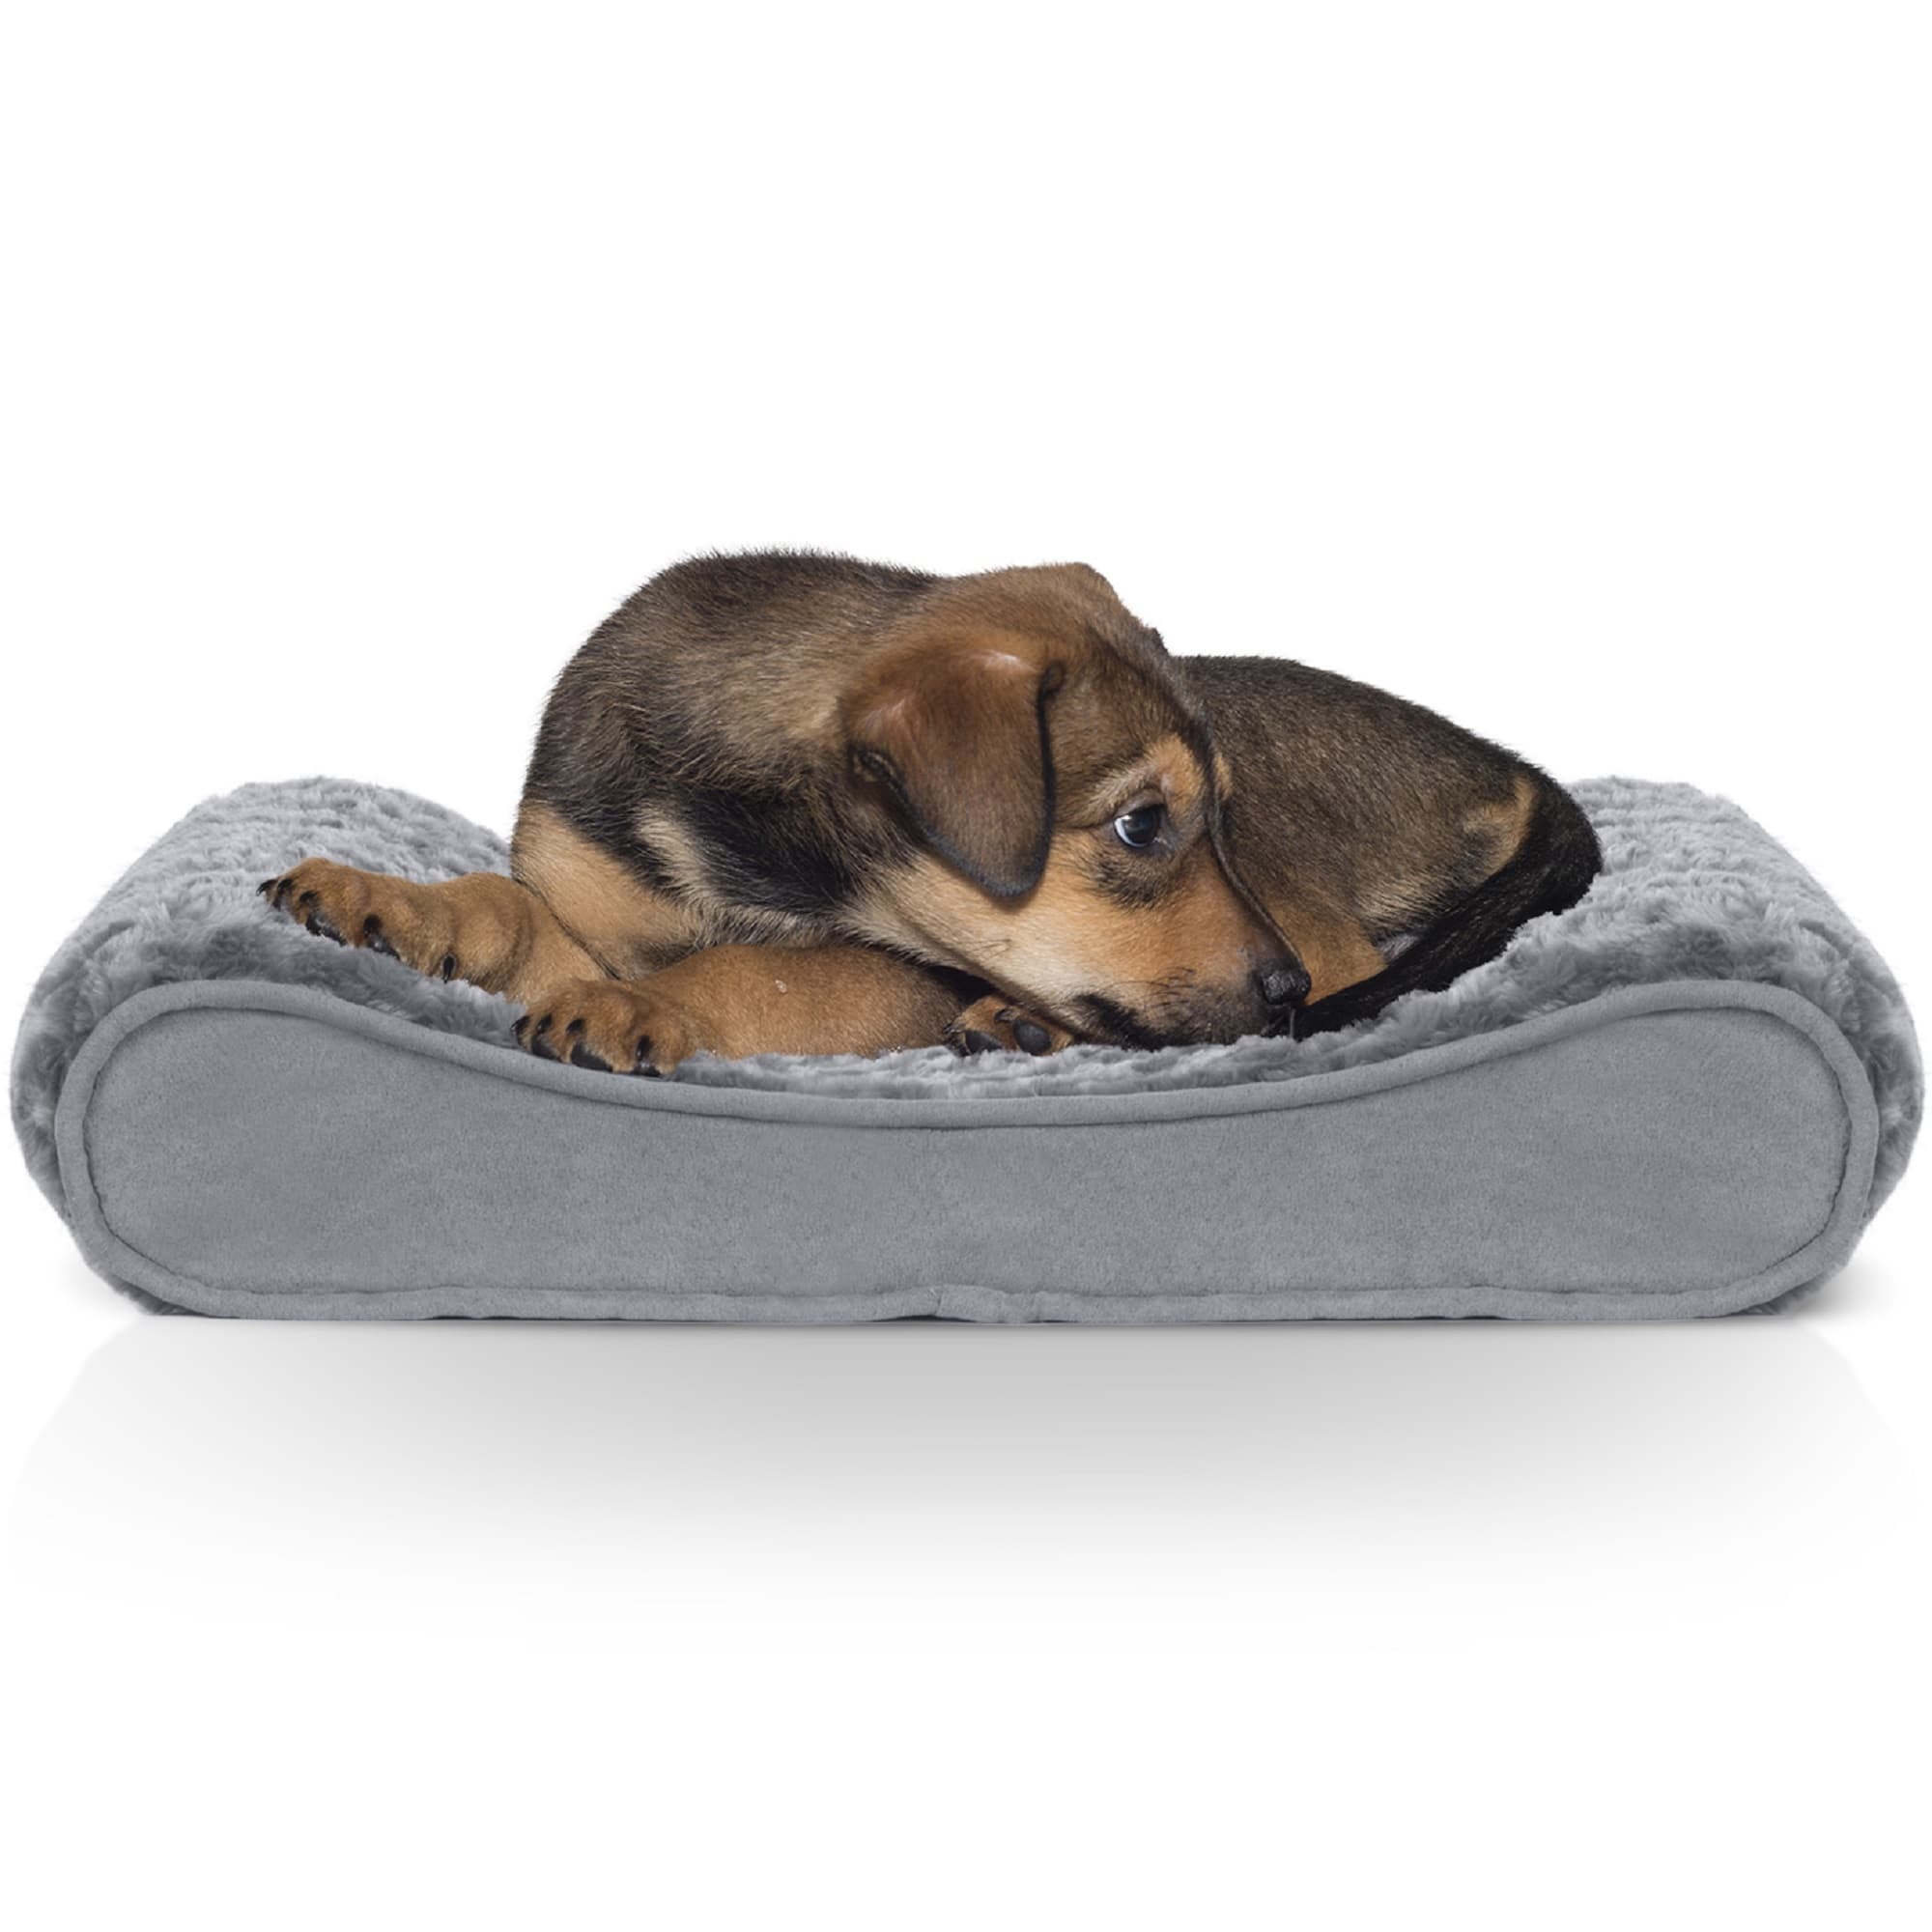 FurHaven Ultra Plush Luxe Lounger Orthopedic Dog Bed Gray, 14